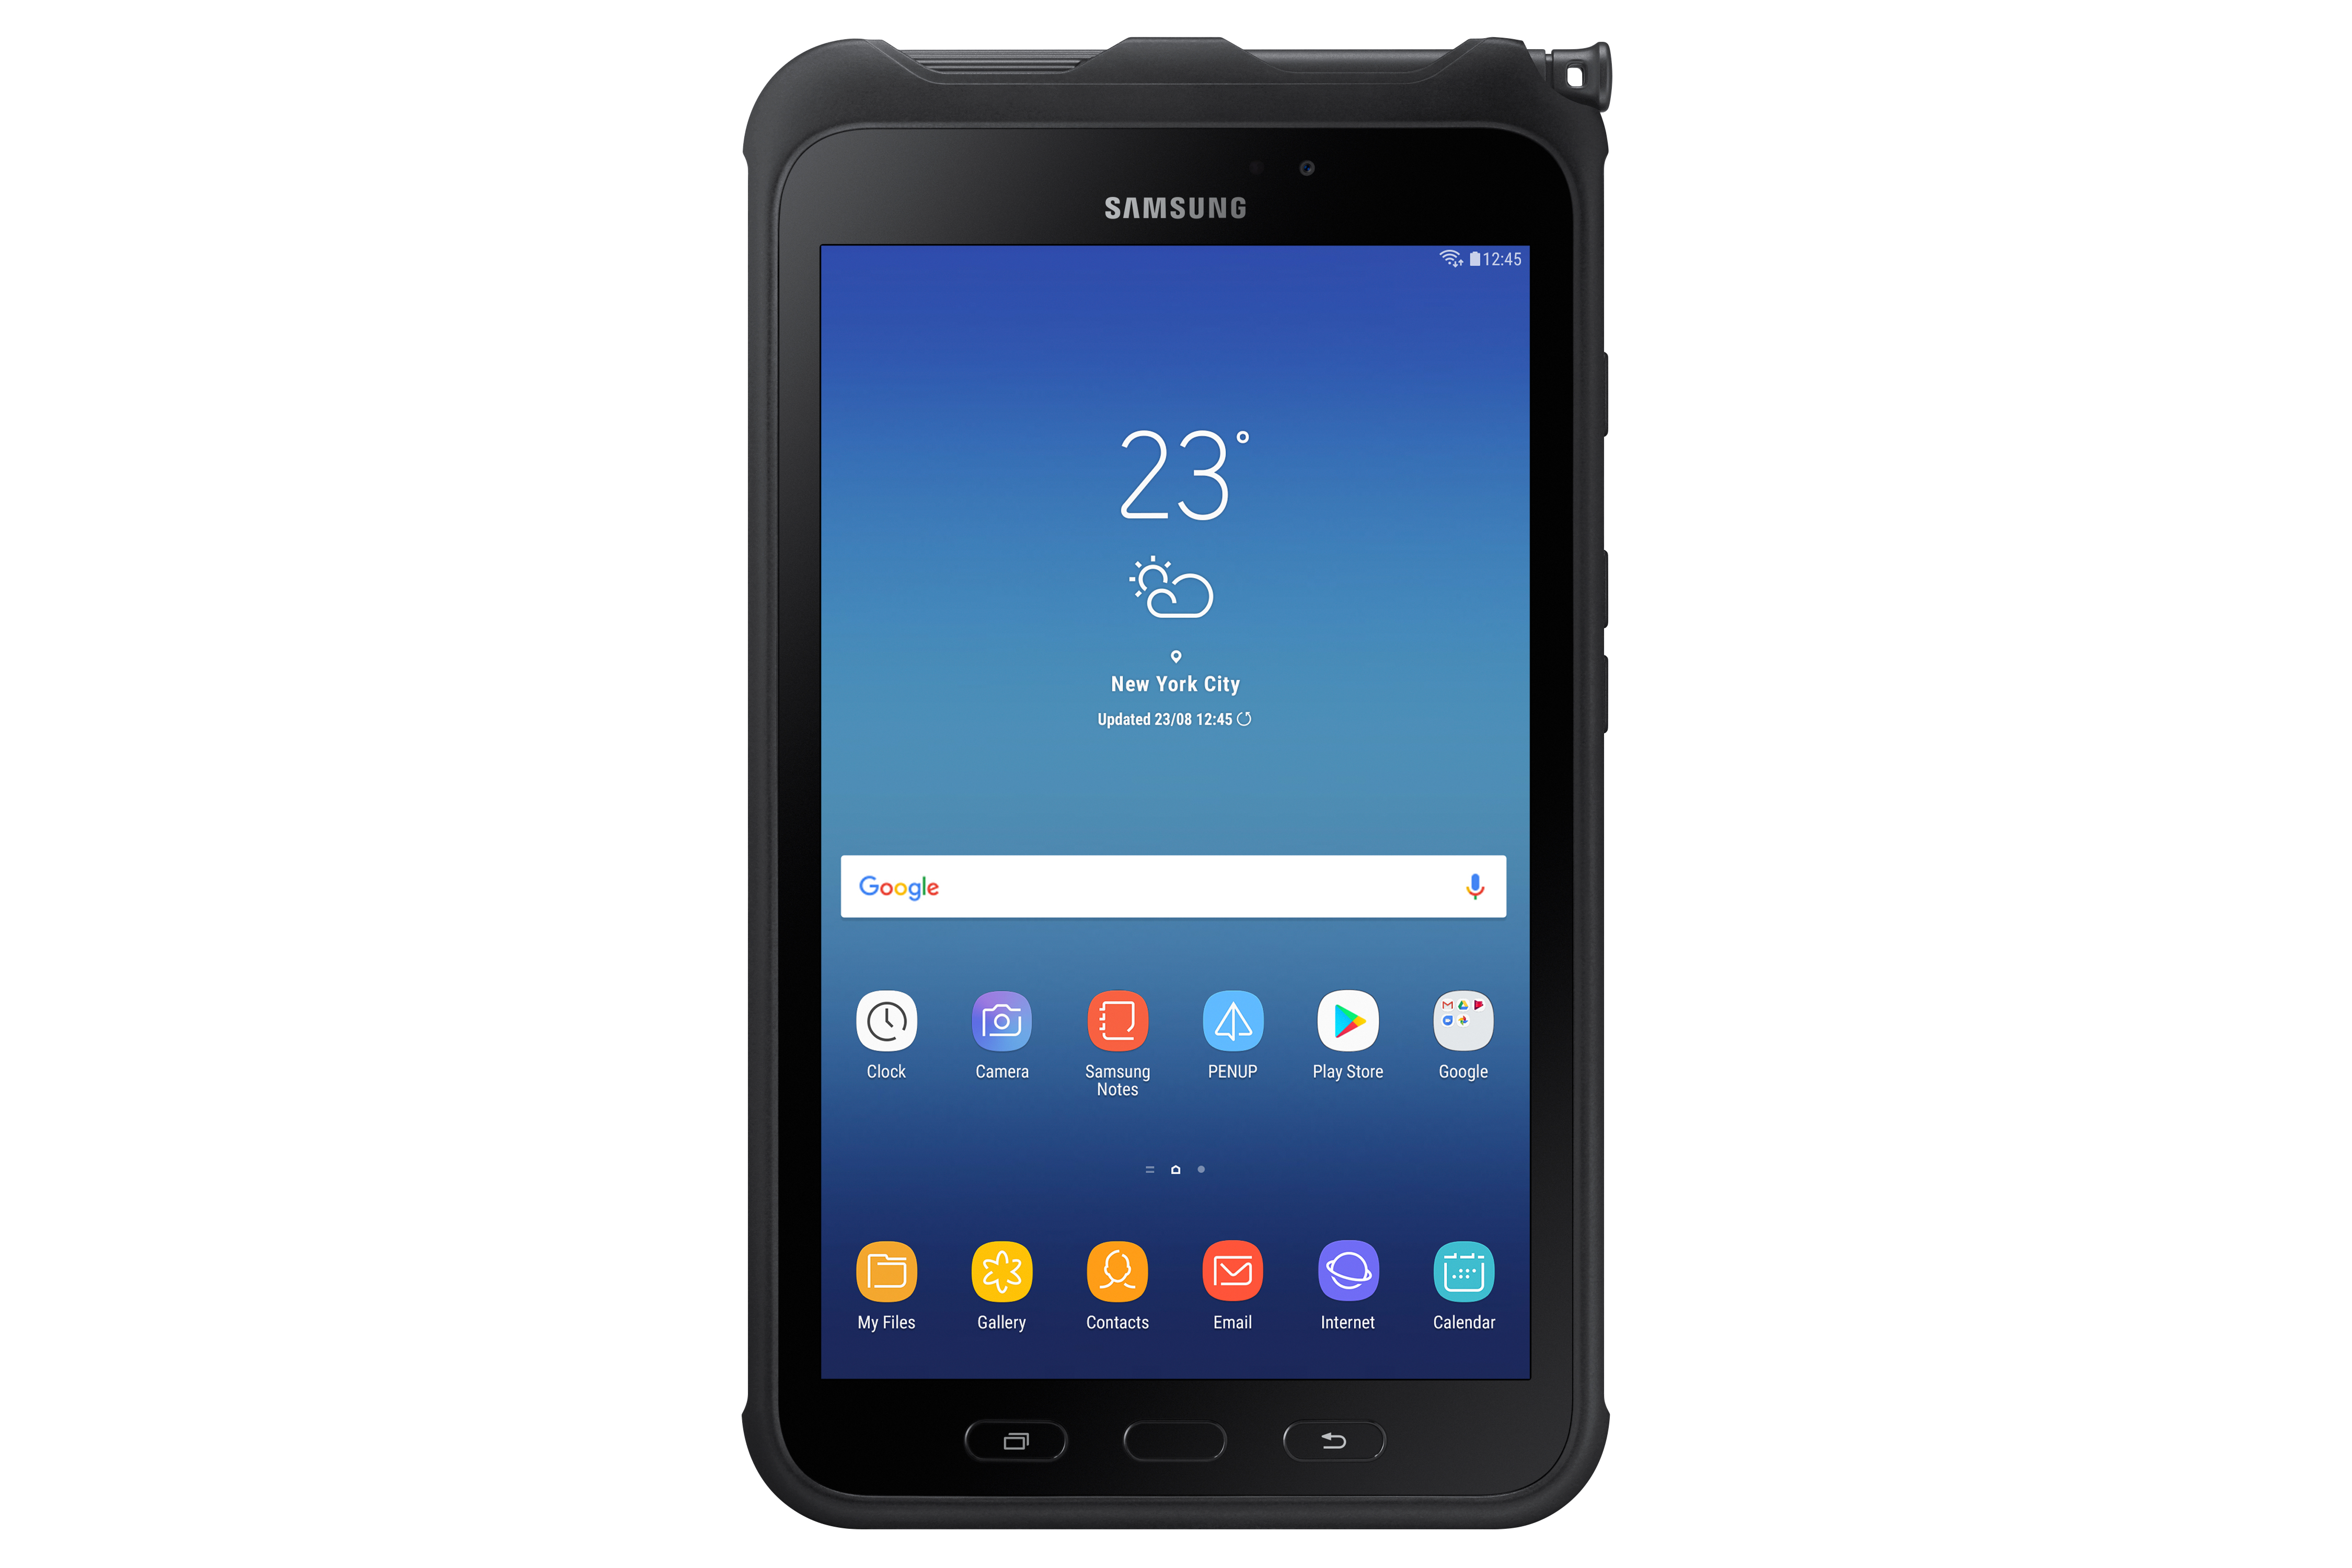 Samsung Announces Galaxy Tab Active2, a Rugged Android Tablet for
Mobile Workers